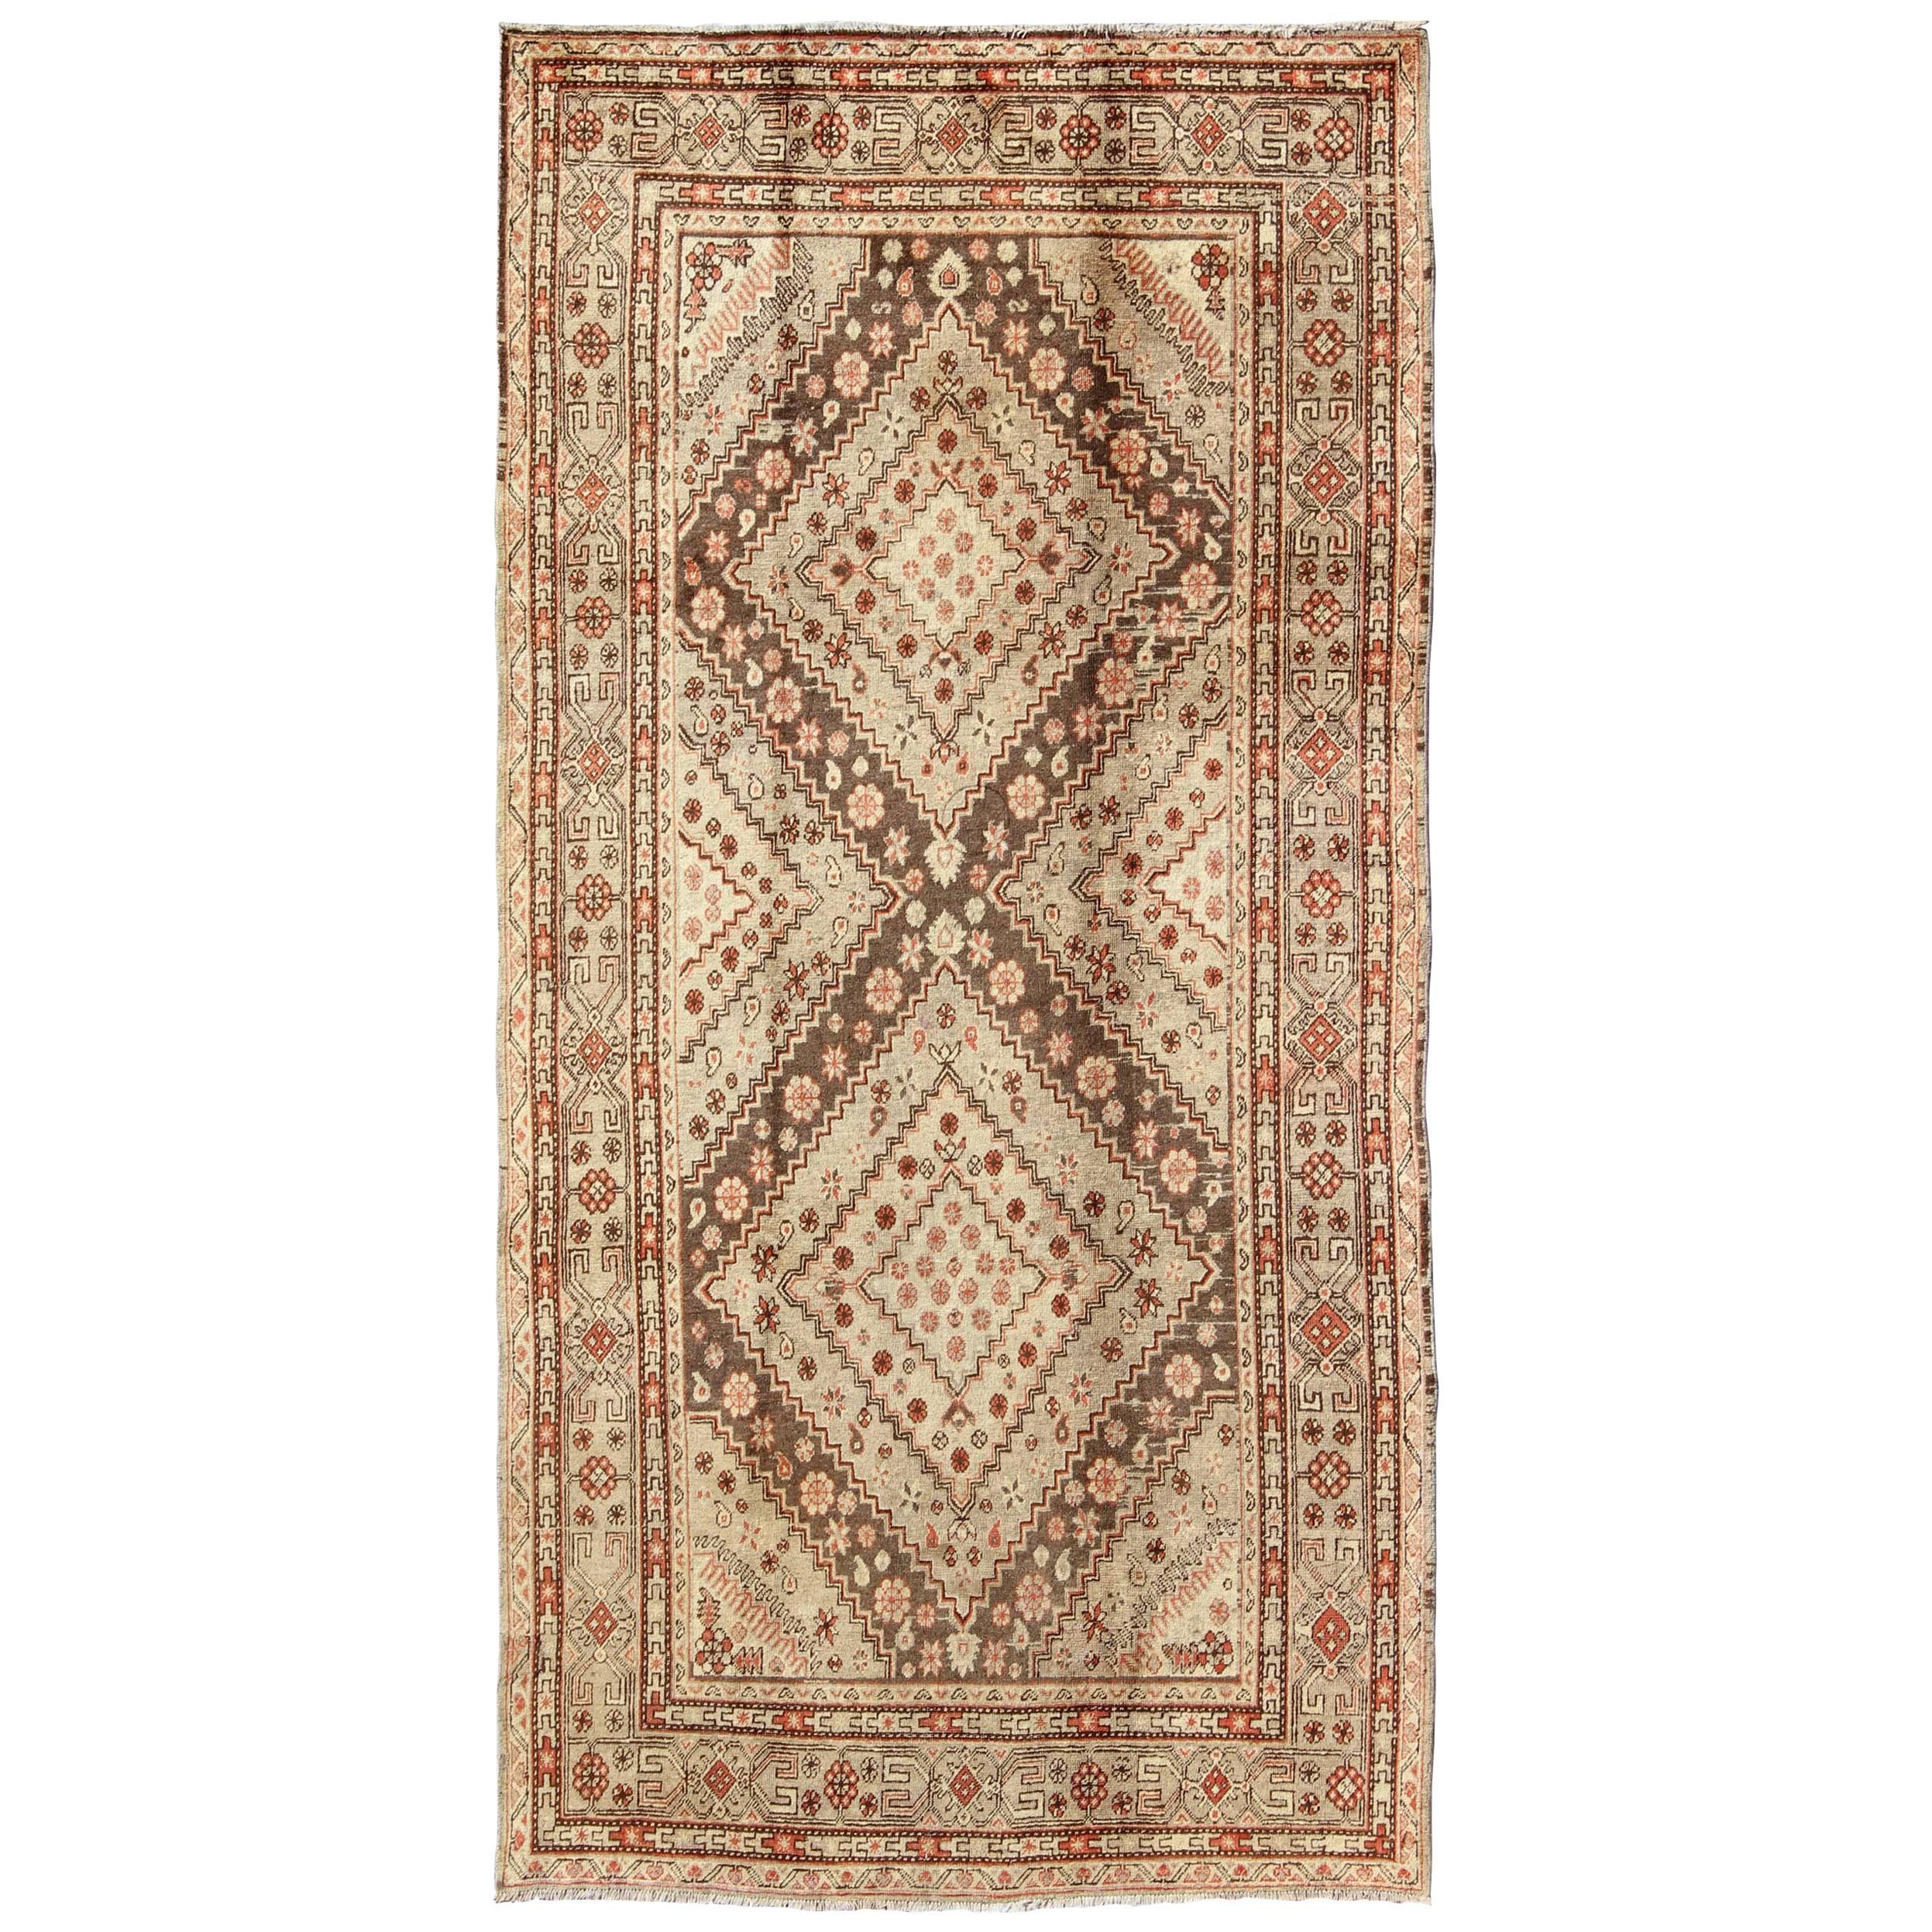 Early 20th Century Antique Khotan Rug with Paired Diamond Medallions in Brown